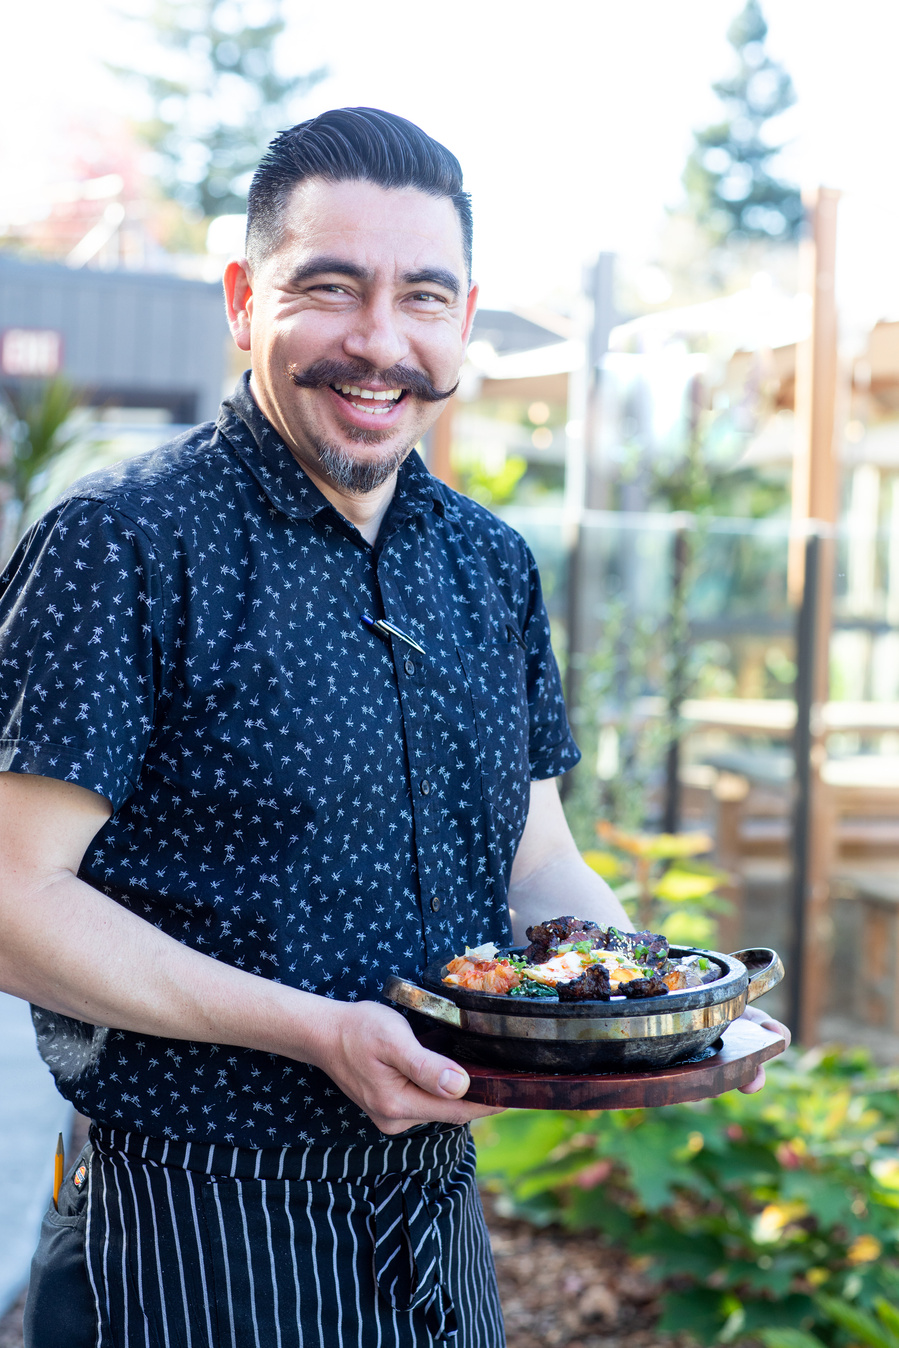 Smiling chef with mustache in black and white outfit, holding a steaming dish of food  on the outdoor patio of the restaurant. Flamingo resort restaurant photography. 